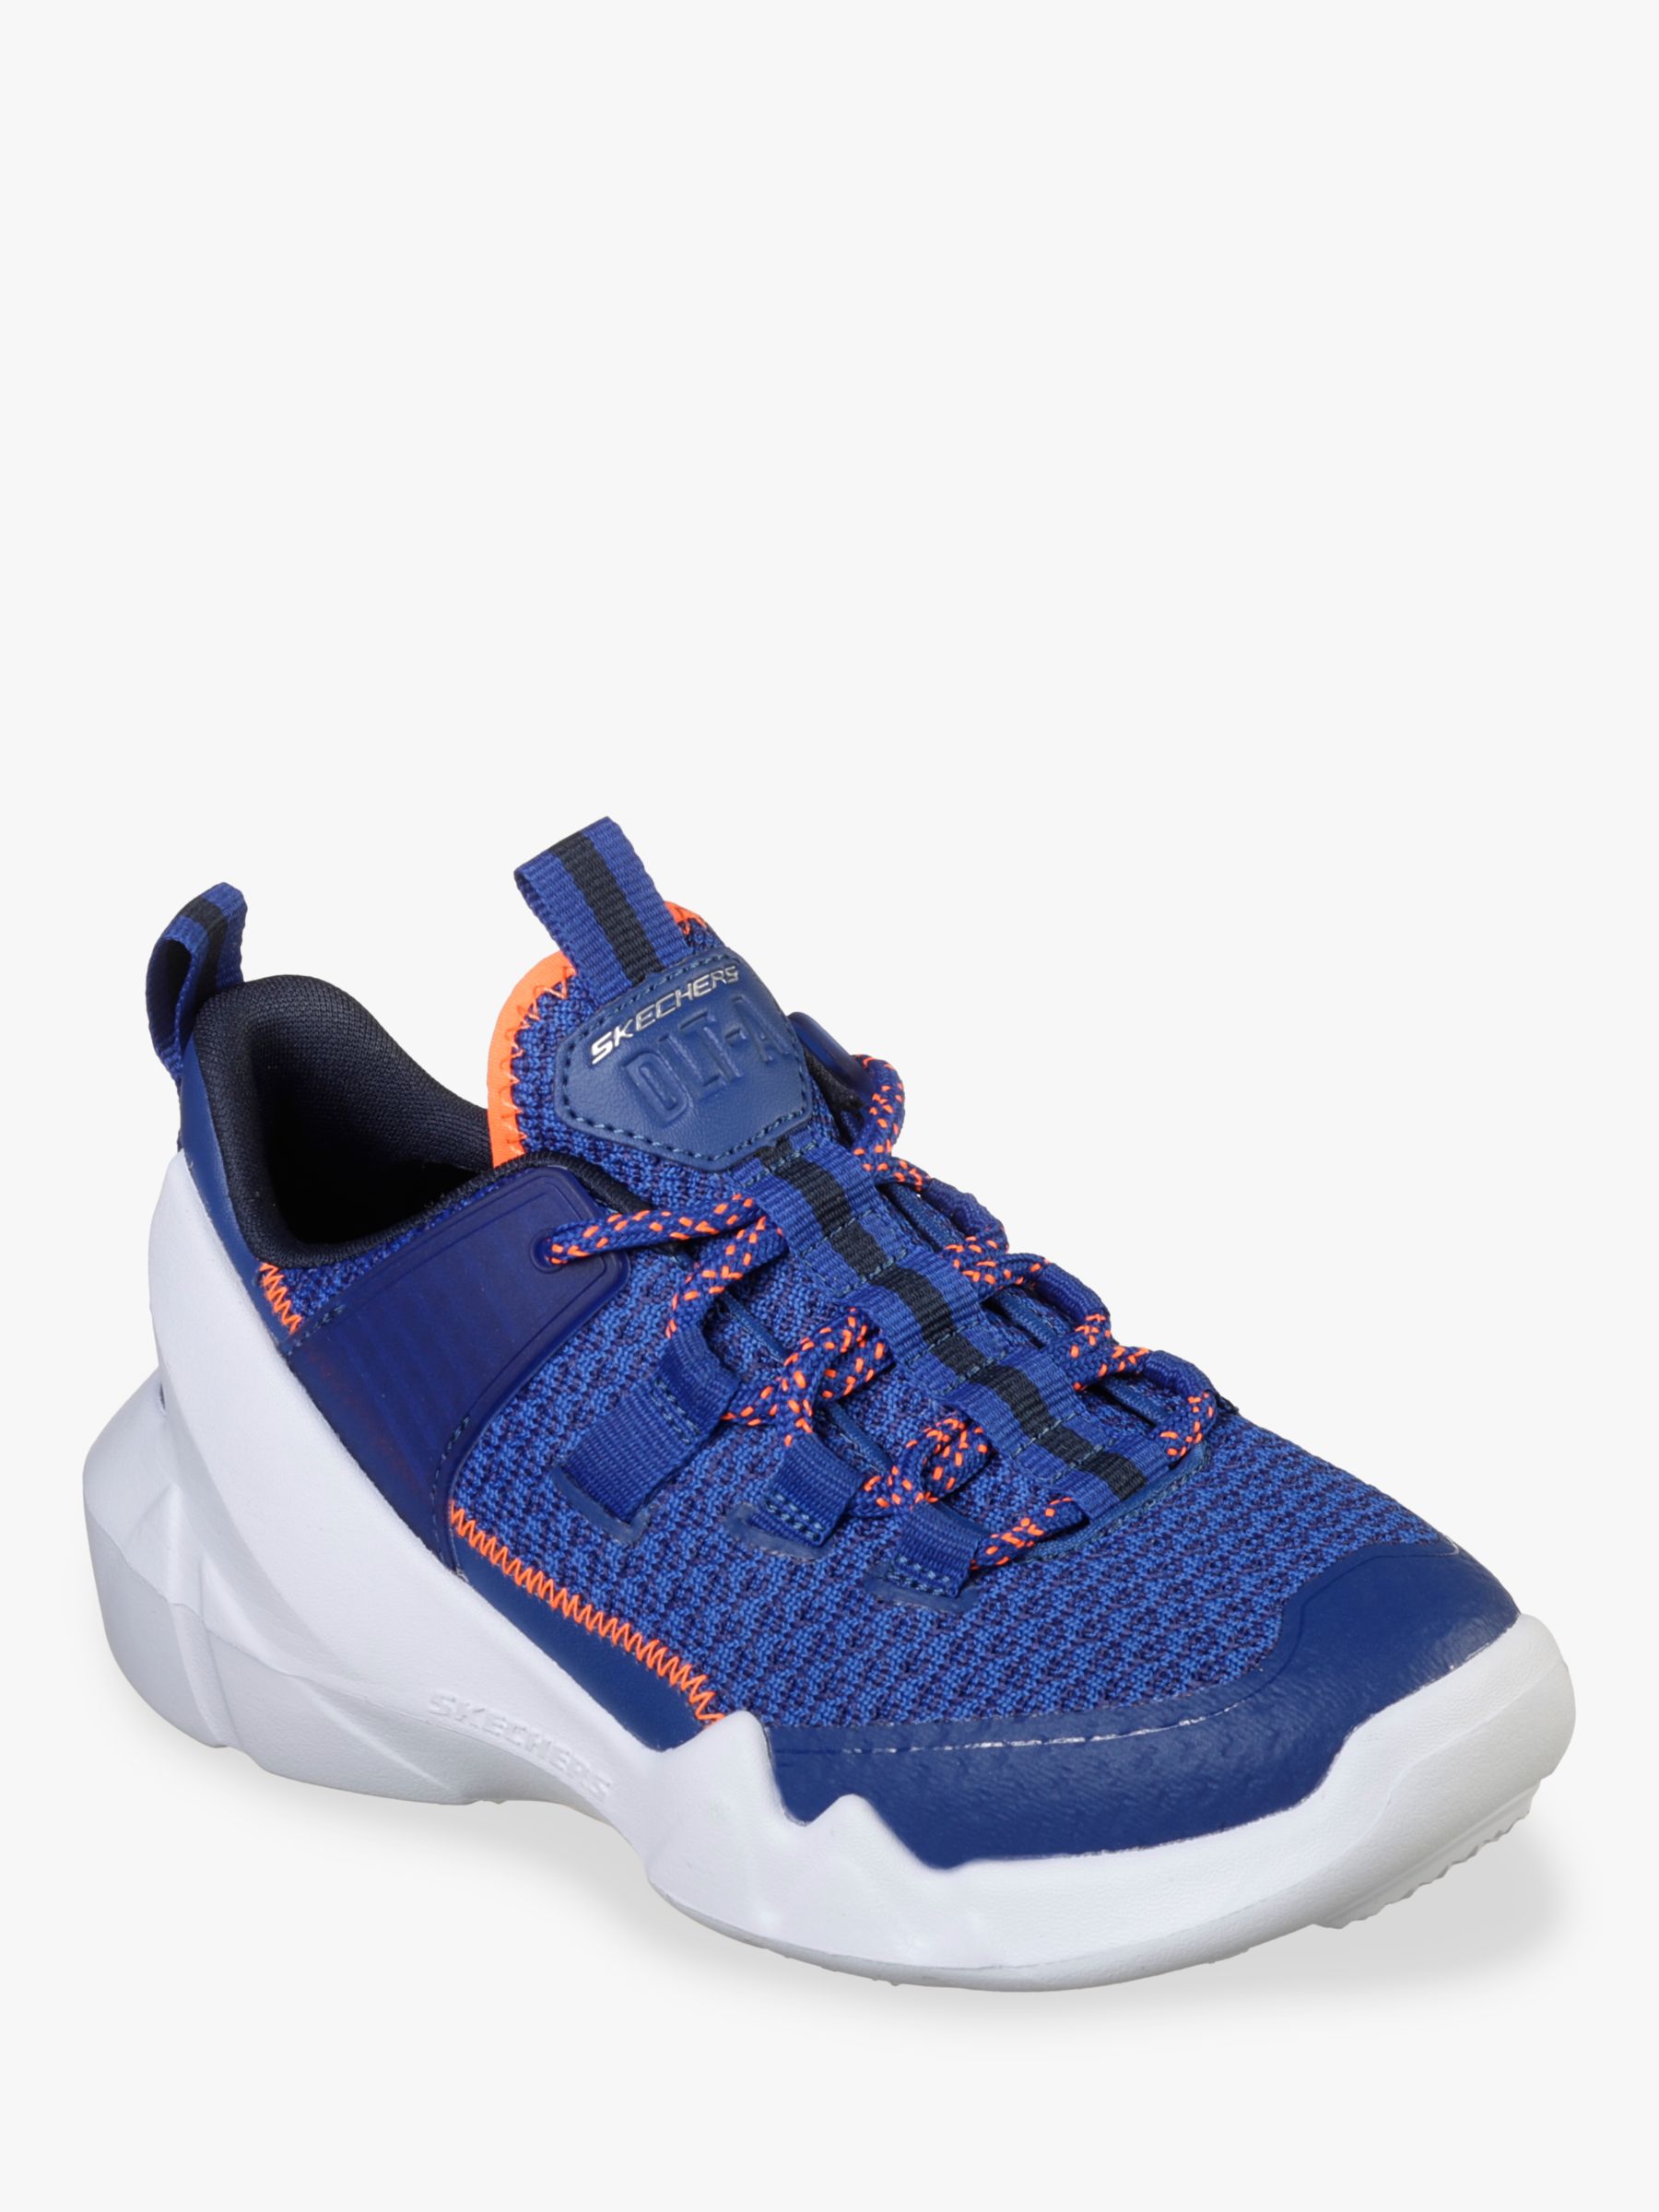 Skechers Children's DLT-A Trainers at John Lewis & Partners